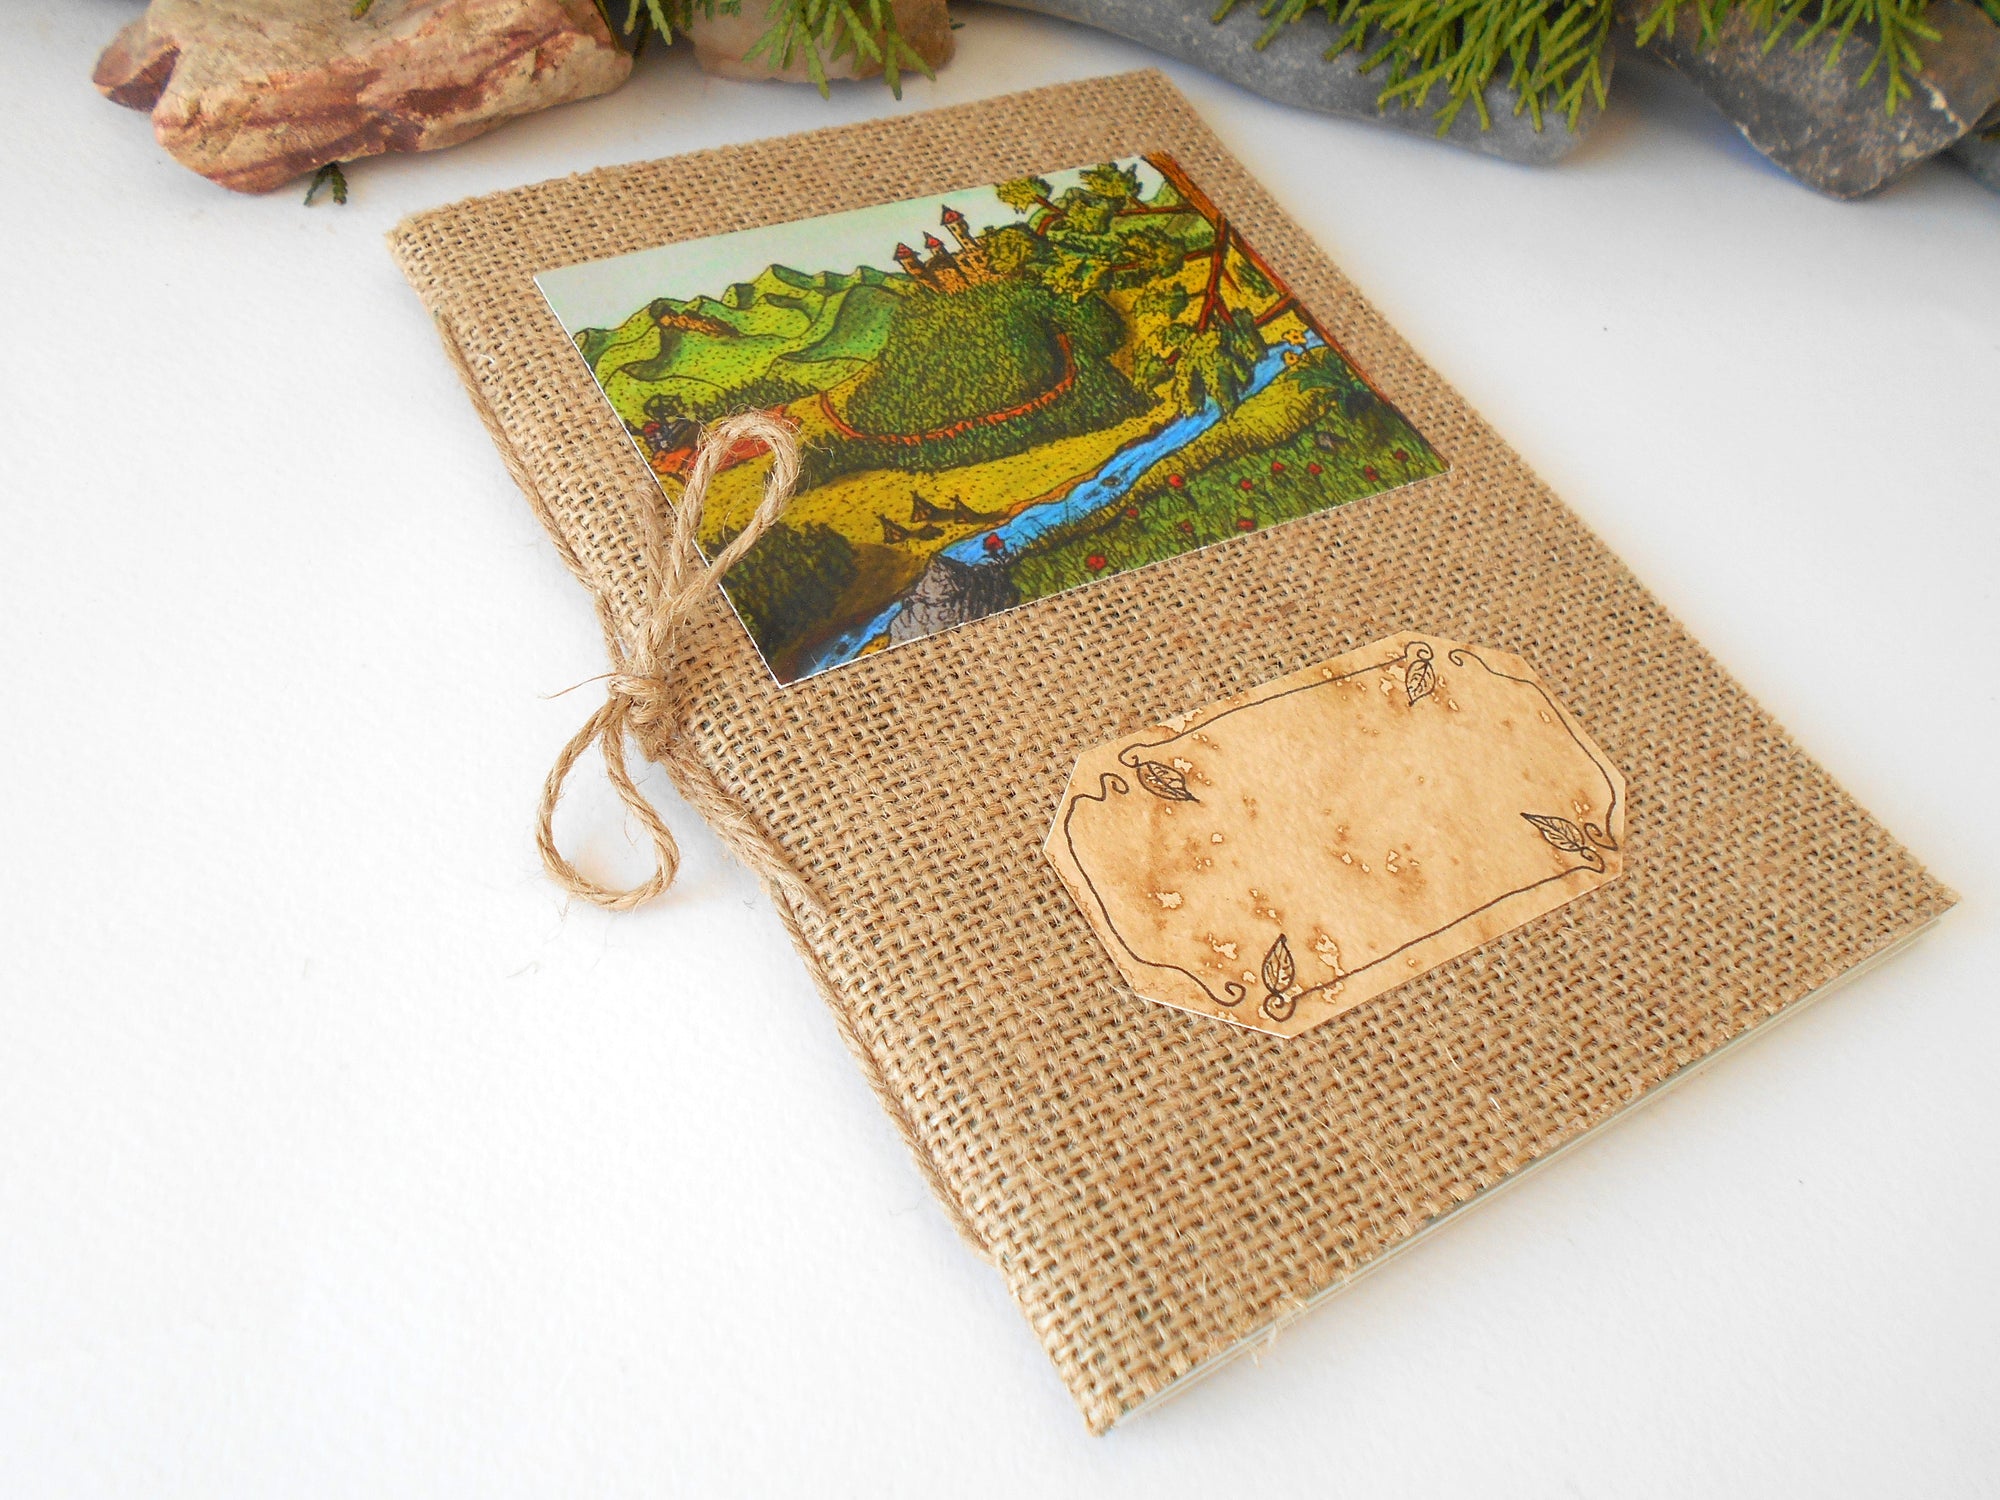 This fabric notebook with soft covers is made from a material I call ''Fabricpaper''. The material I make myself as I glue the fabric with eco-friendly adhesive onto a colorful crafting cardstock with 105 lbs. The fabric is 100% natural burlap fabric produced in Bulgaria and is strong and fine for crafting books.